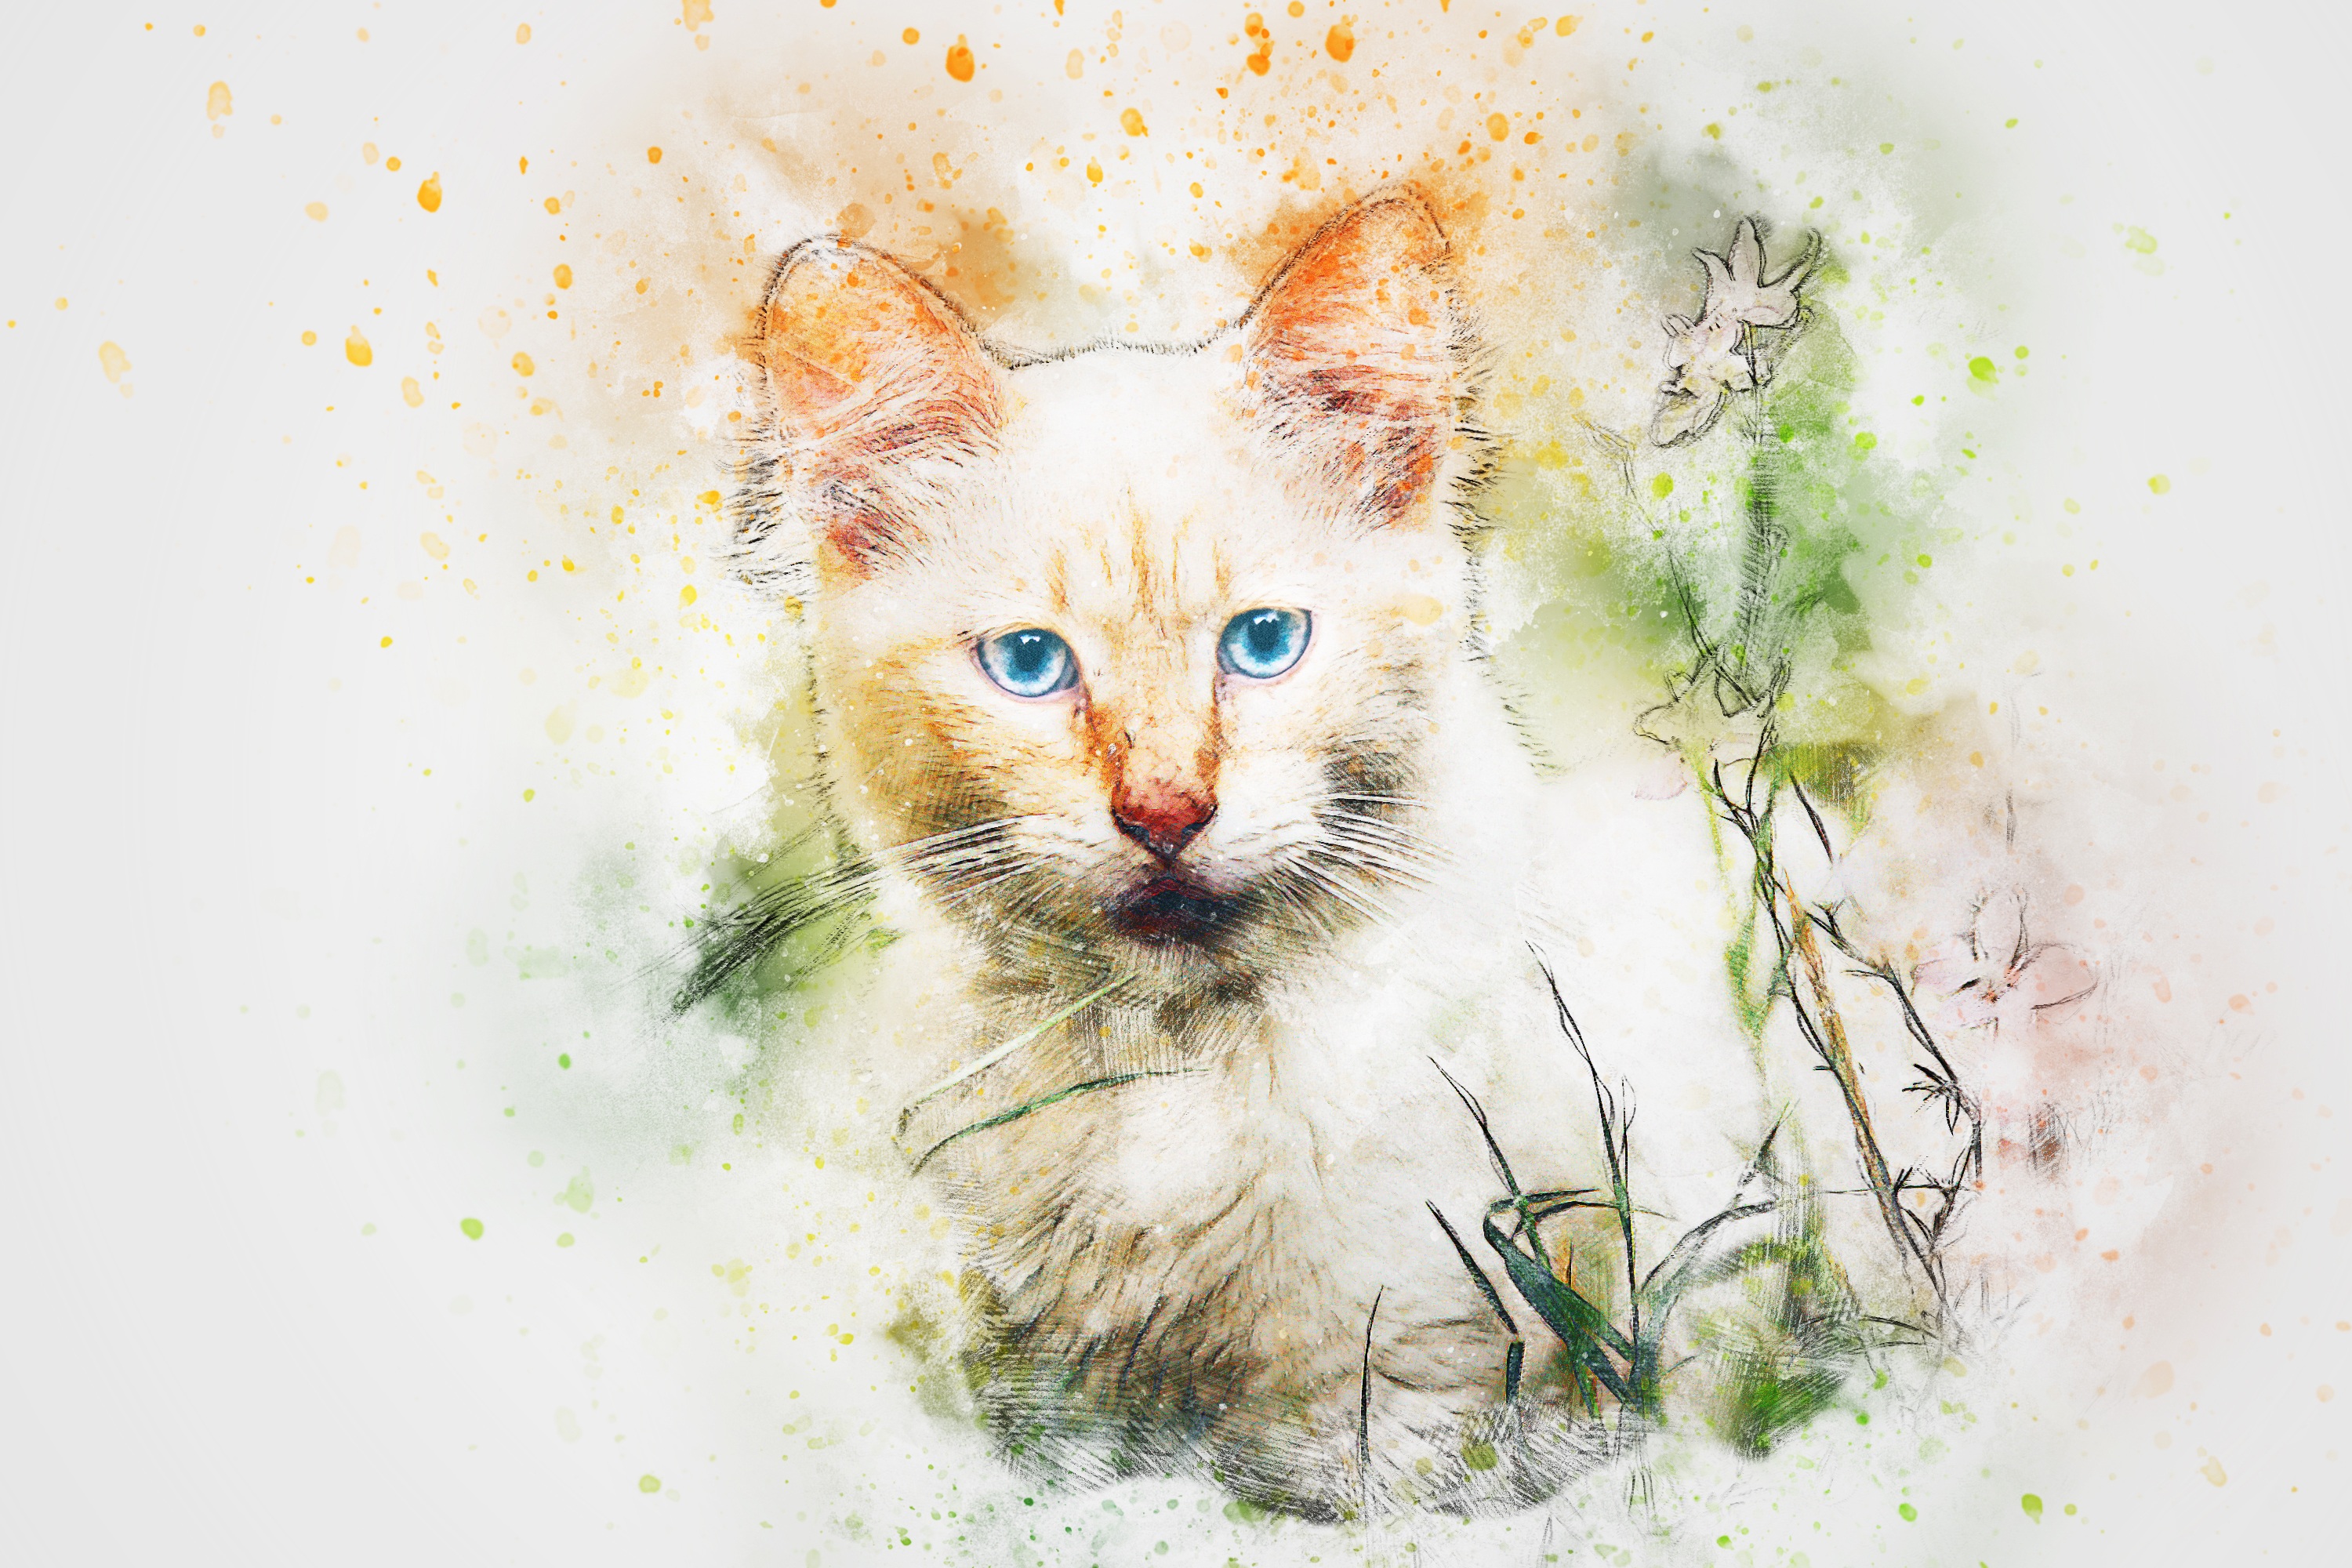 Watercolor Artistic Cat with Blue Eyes by ractapopulous